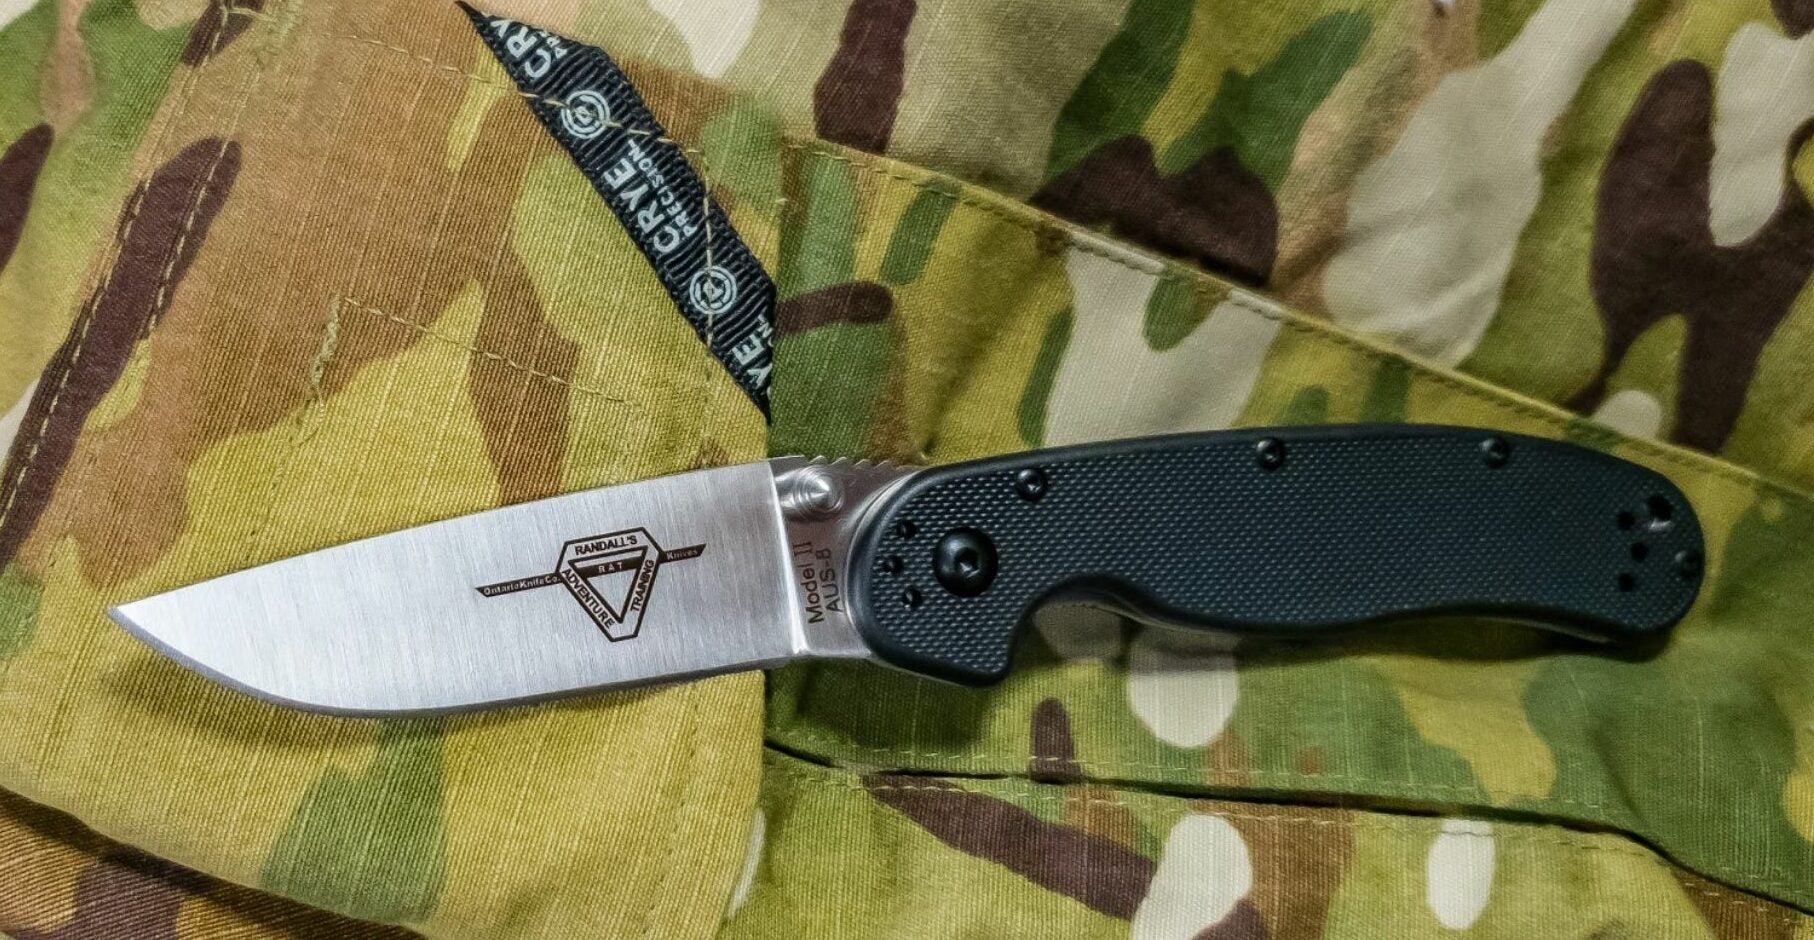 Are Spyderco Knives Good For Edc